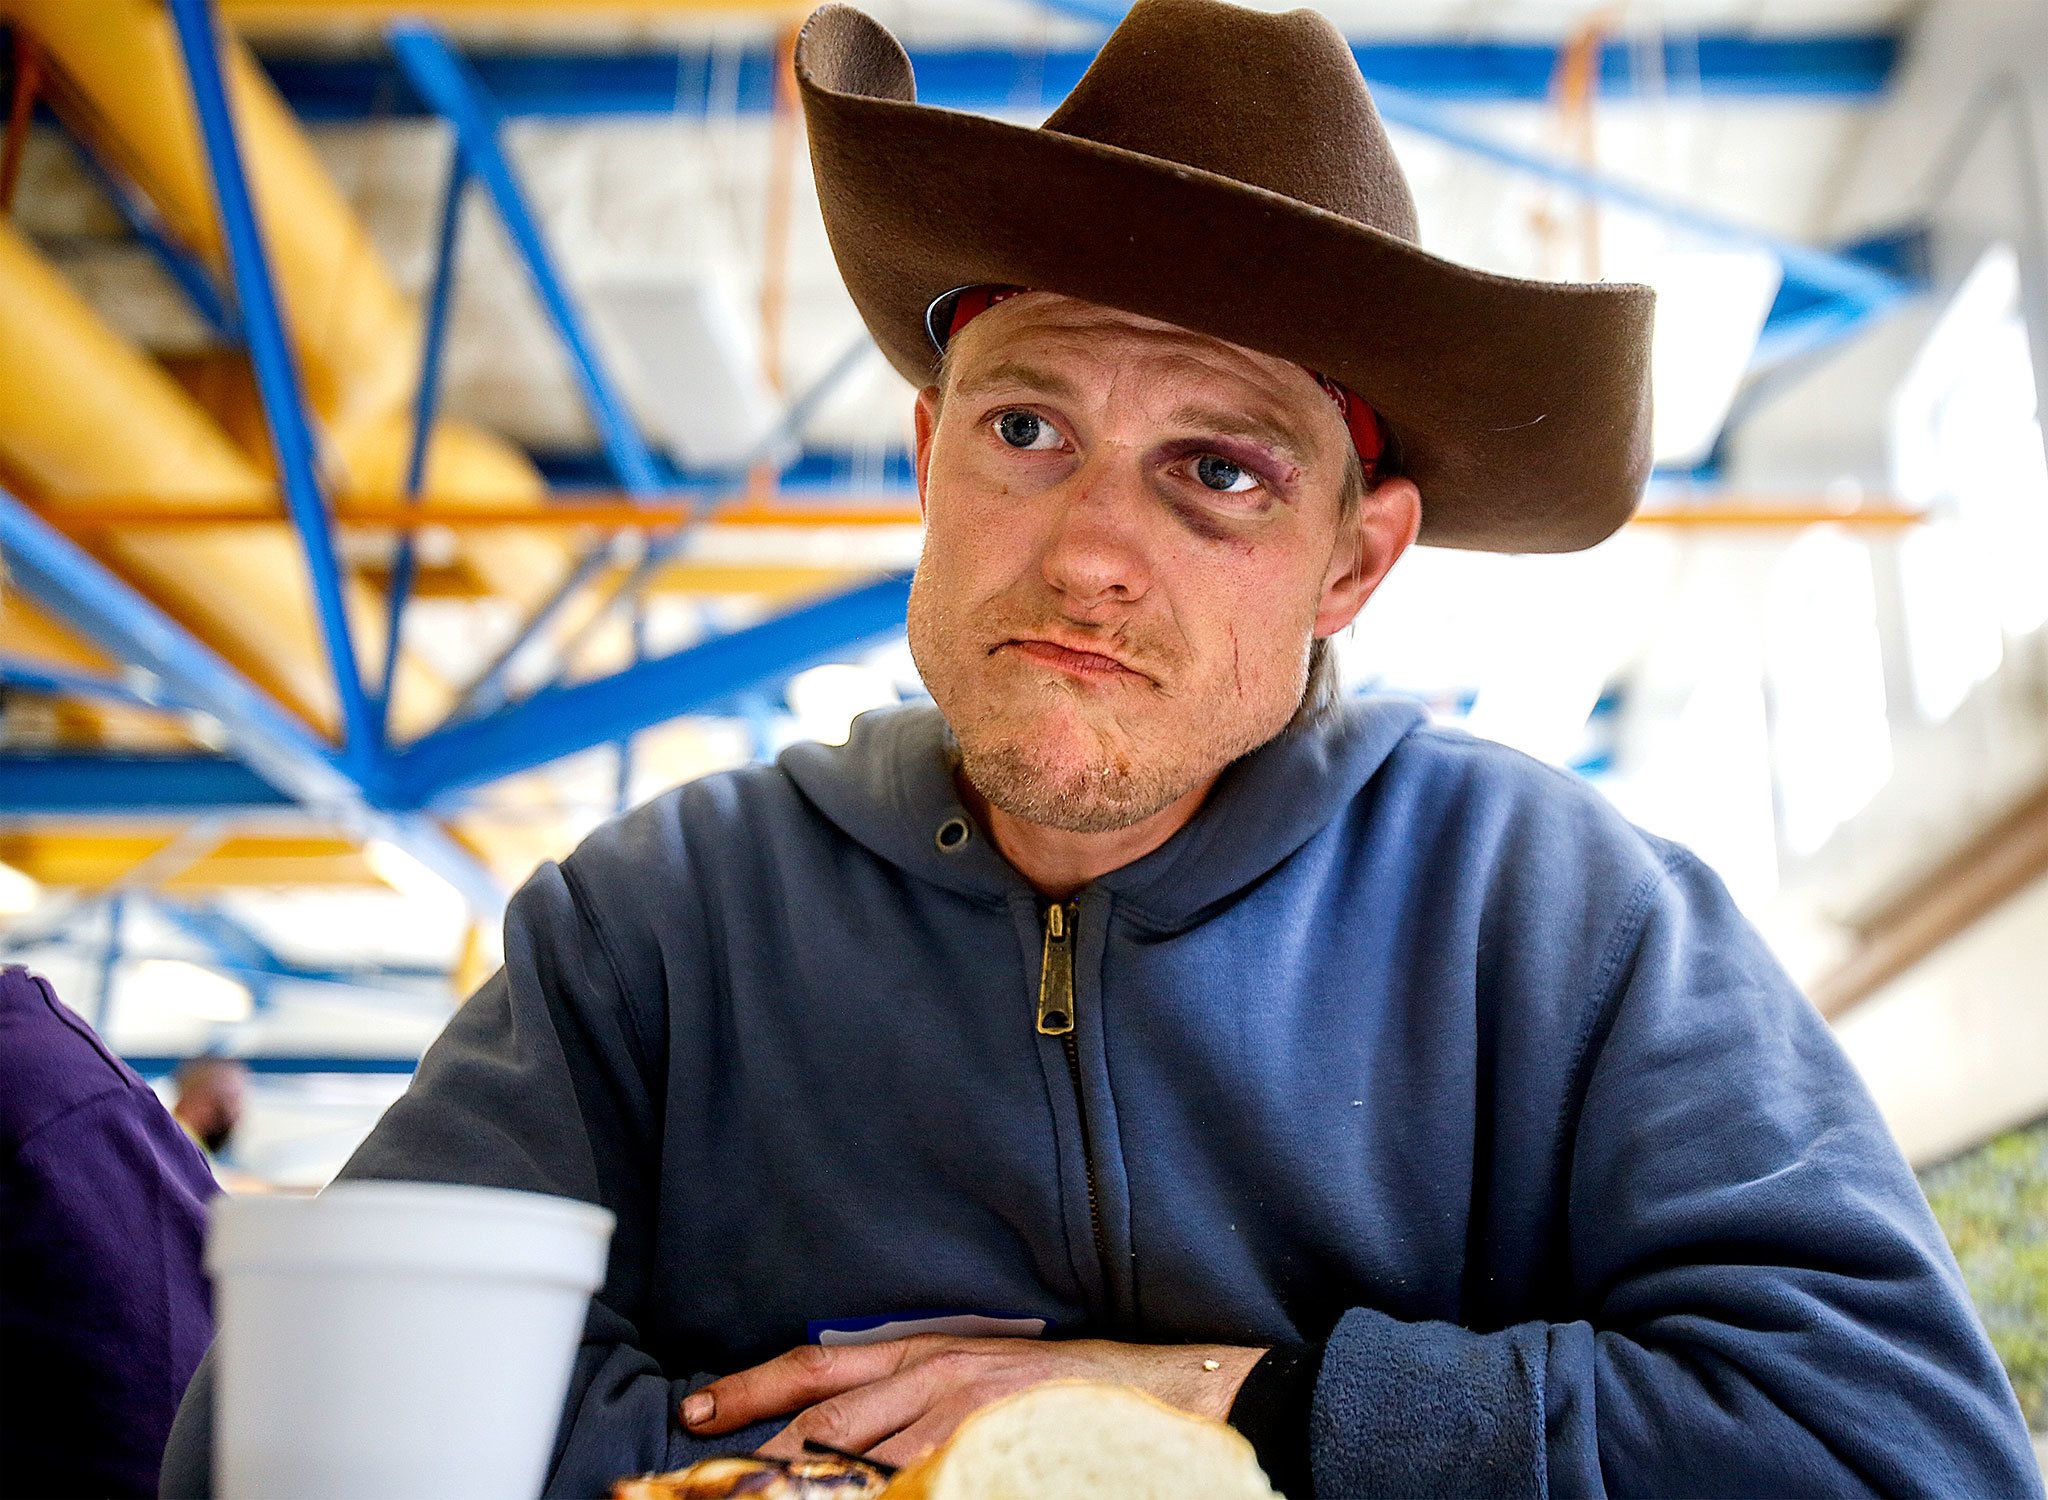 Homelessness has a face. And it belongs to Zachary Standley, 32, of Marysville, as he tries to explain the dangers of living homeless. “Thank God there’s still altruism and good-hearted people,” he said while enjoying a hearty lunch atProject Homeless Connect. (Dan Bates/The Herald)